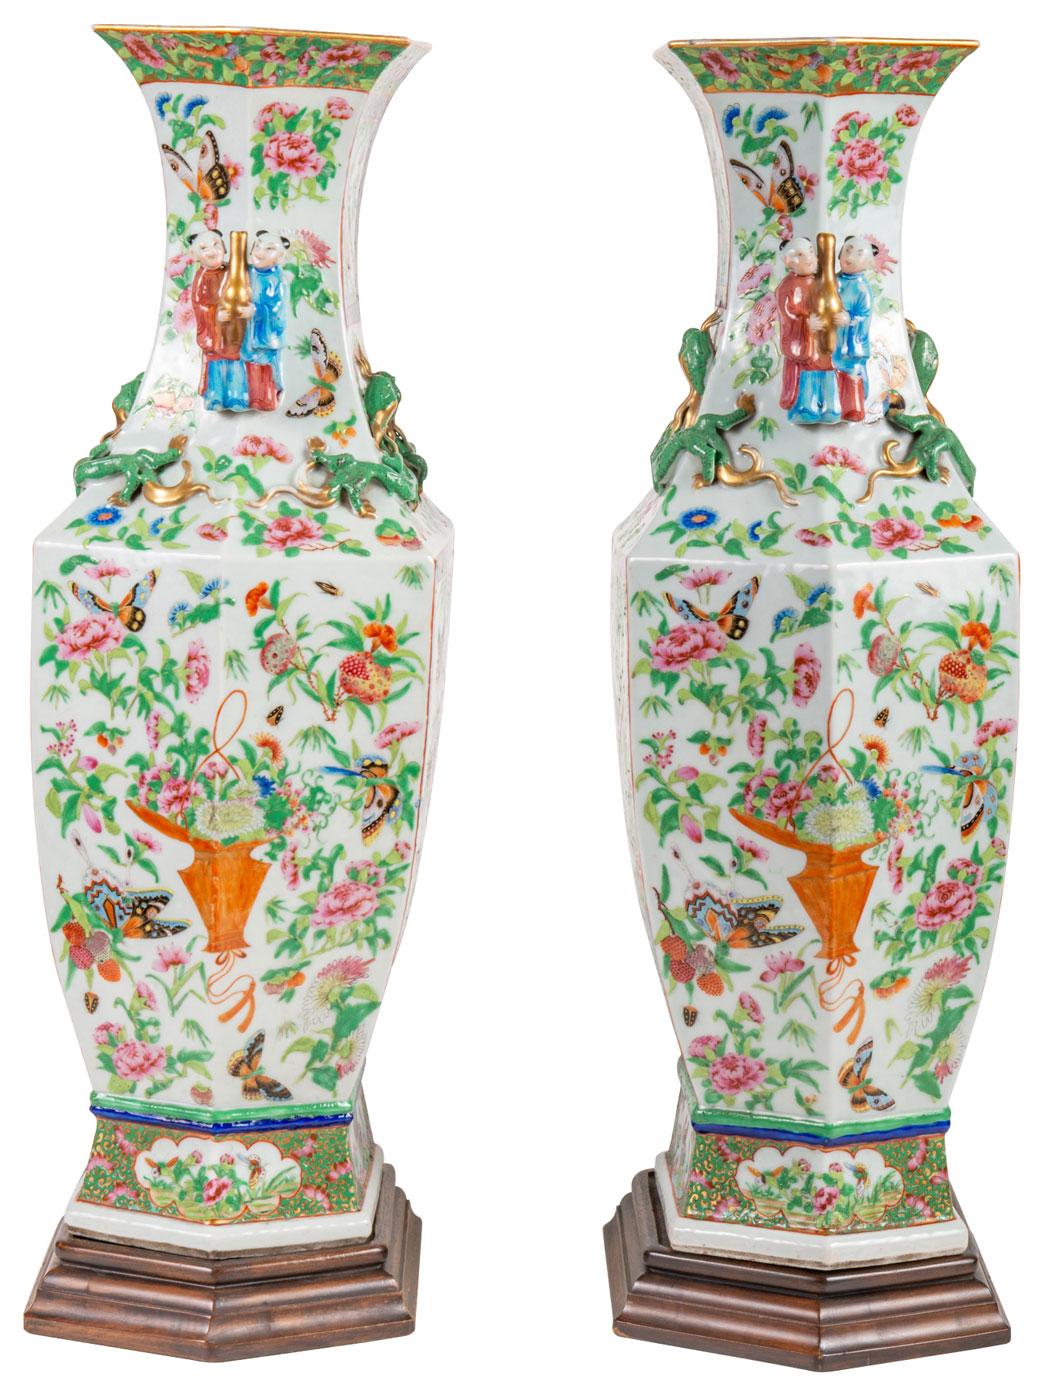 A very good quality pair of mid-19th century Chinese Canton / Rose medallion vases on stands. Each with a white ground, green foliate decoration with exotic bids, flowers and butterflies. Inset panted panels, handles either side of two men carrying